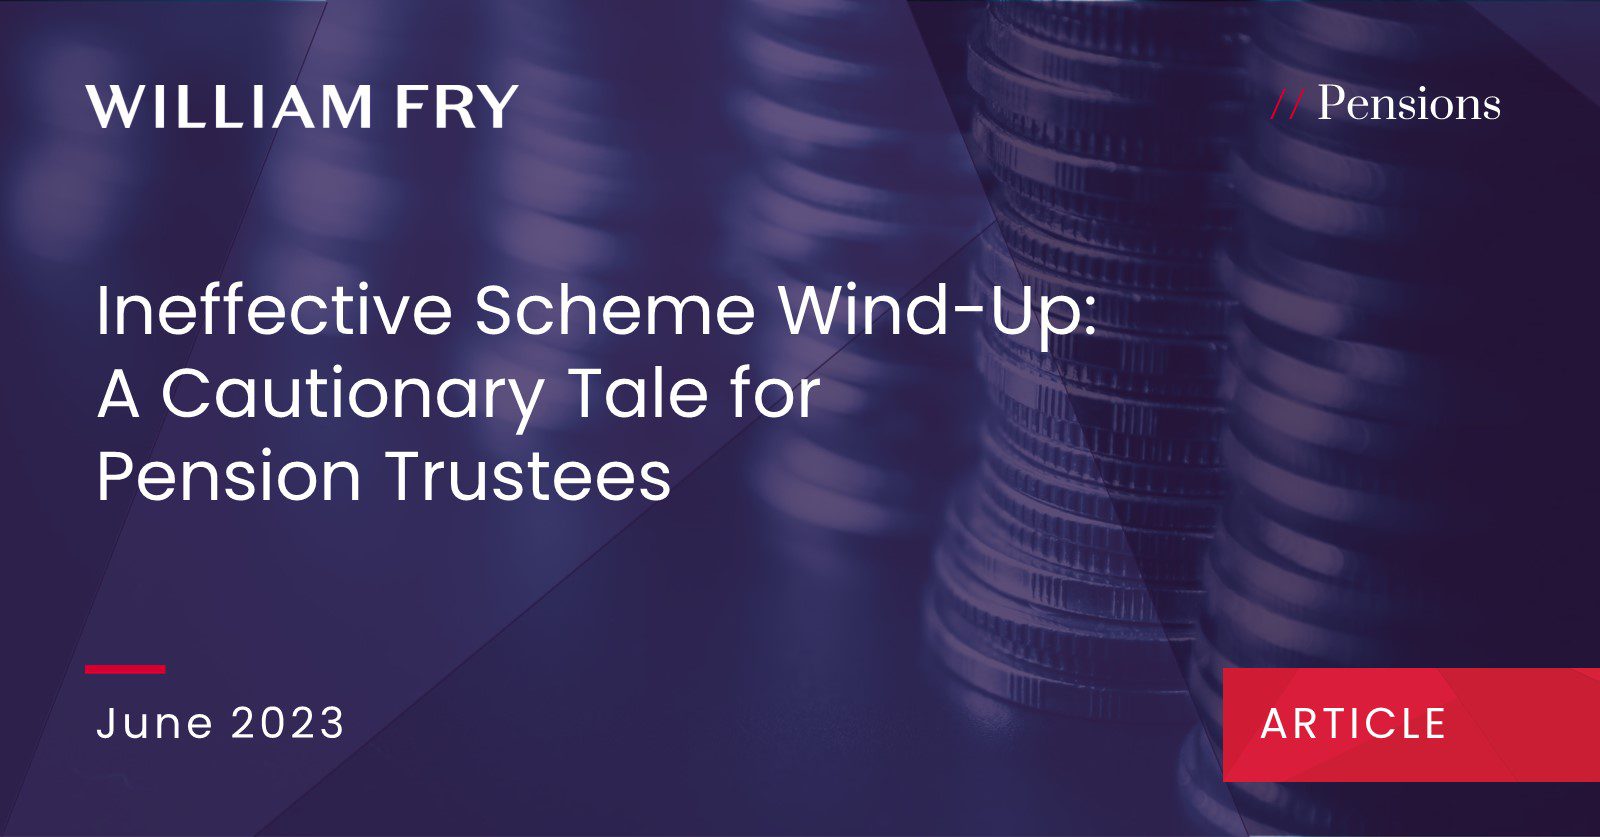 Ineffective Scheme Wind-Up: A Cautionary Tale for Pension Trustees